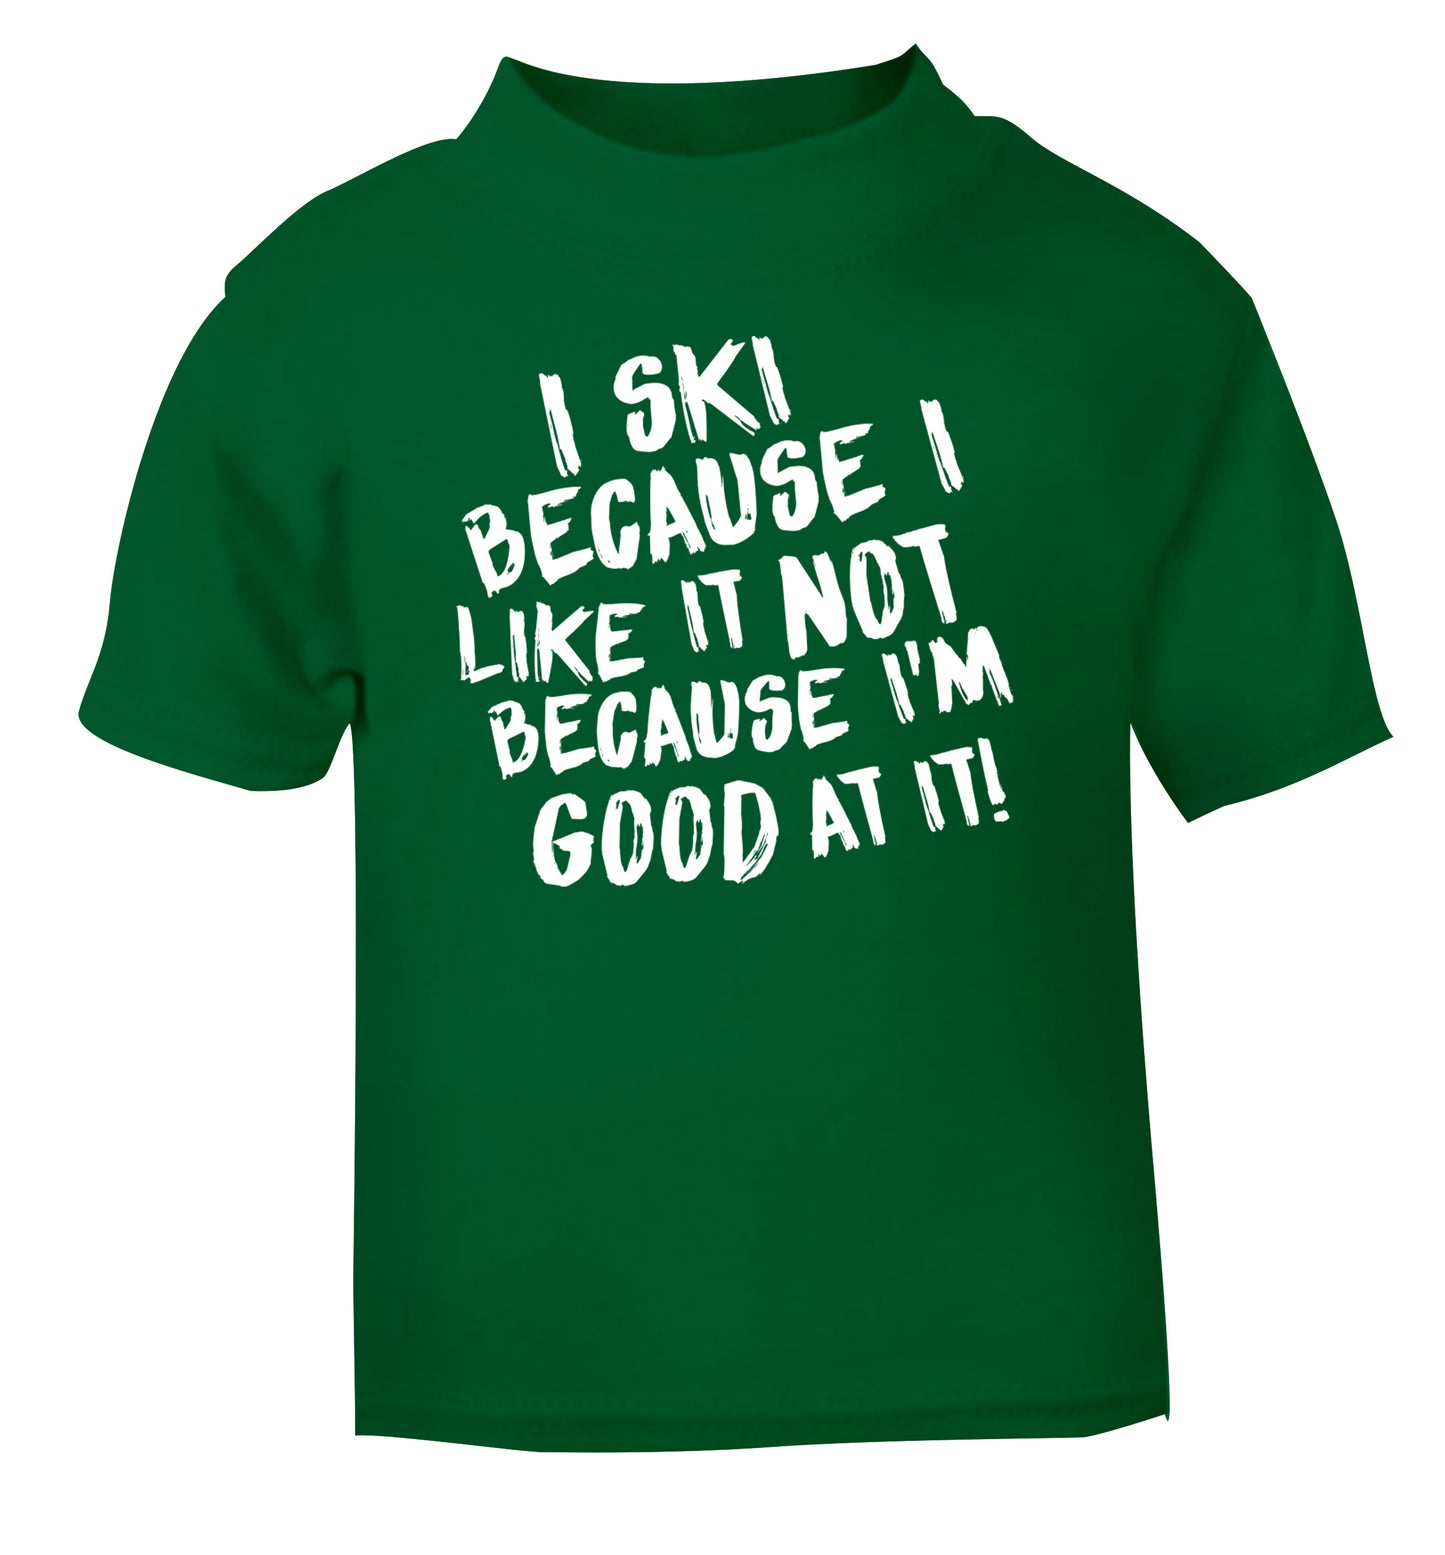 I ski because I like it not because I'm good at it green Baby Toddler Tshirt 2 Years